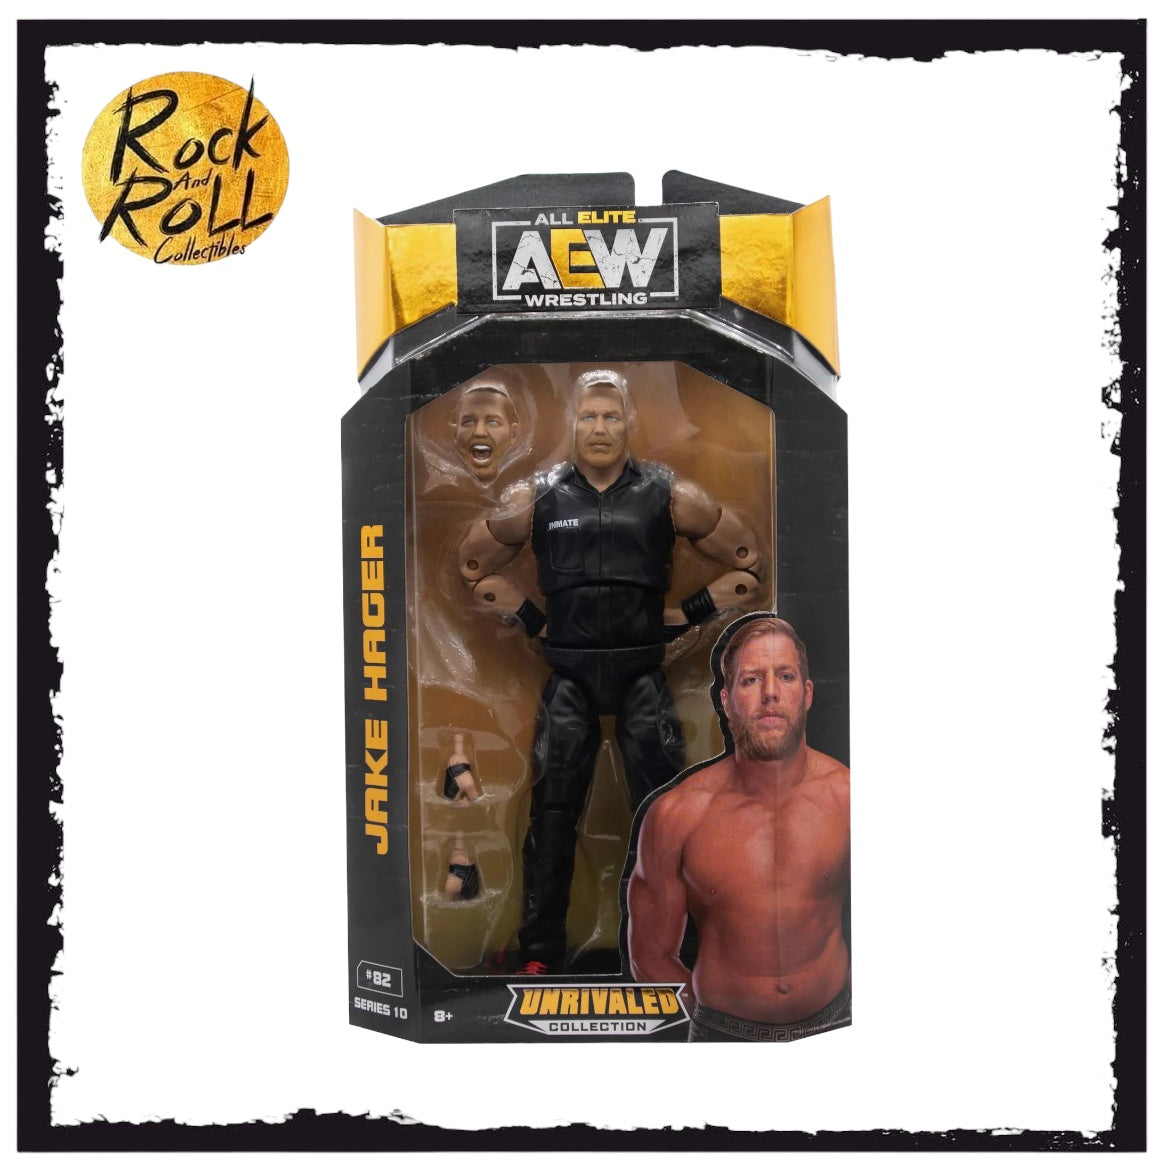 Damaged Packaging - JAKE HAGER - AEW UNRIVALED COLLECTION SERIES 10